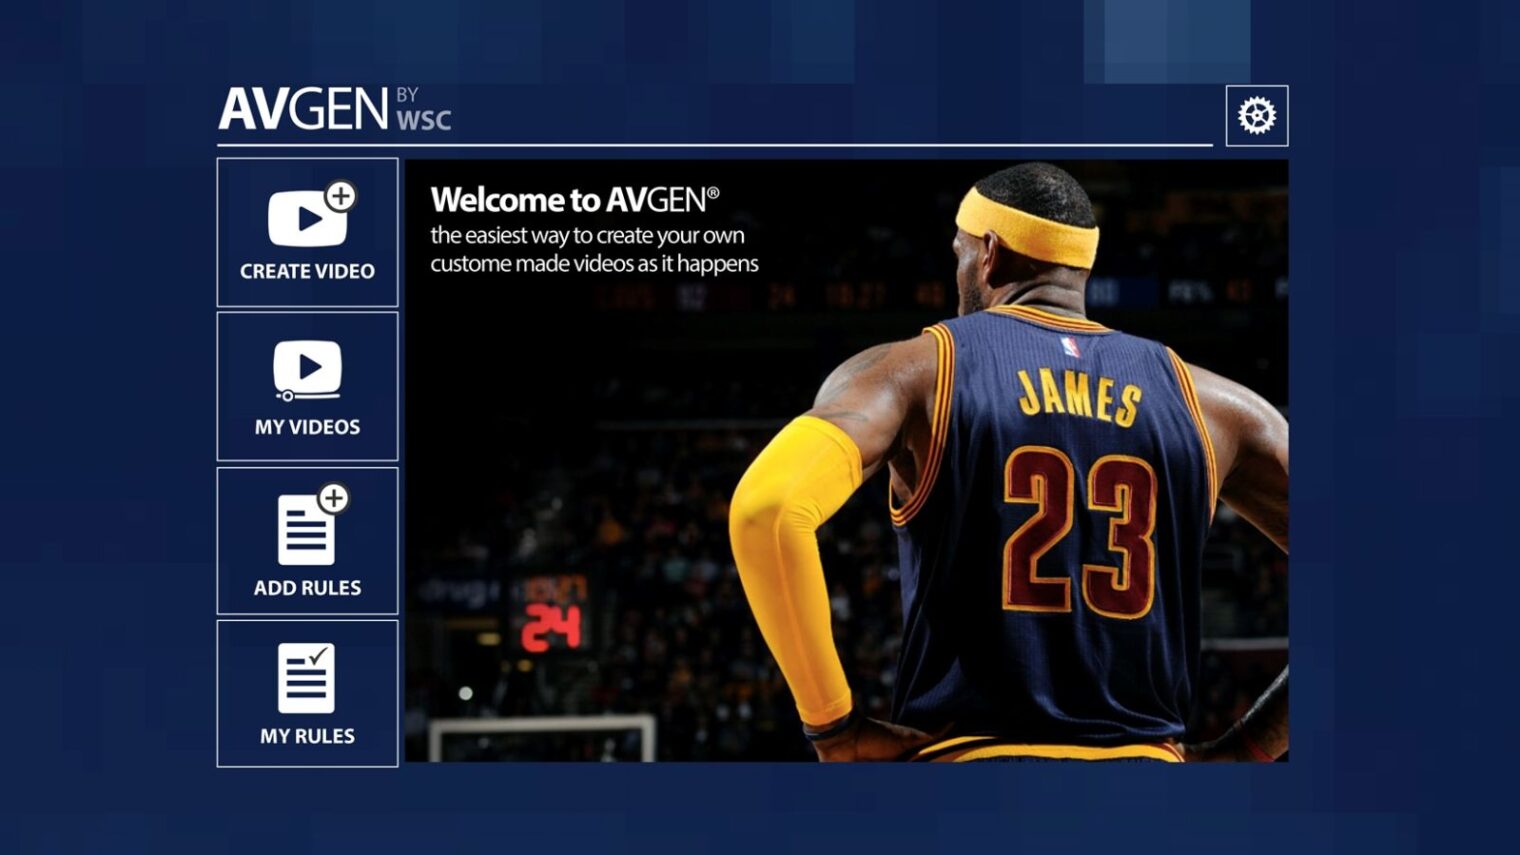 If you’re a LeBron fan, now you can get highlight clips of all his plays. Photo courtesy of WSC Sports Technologies